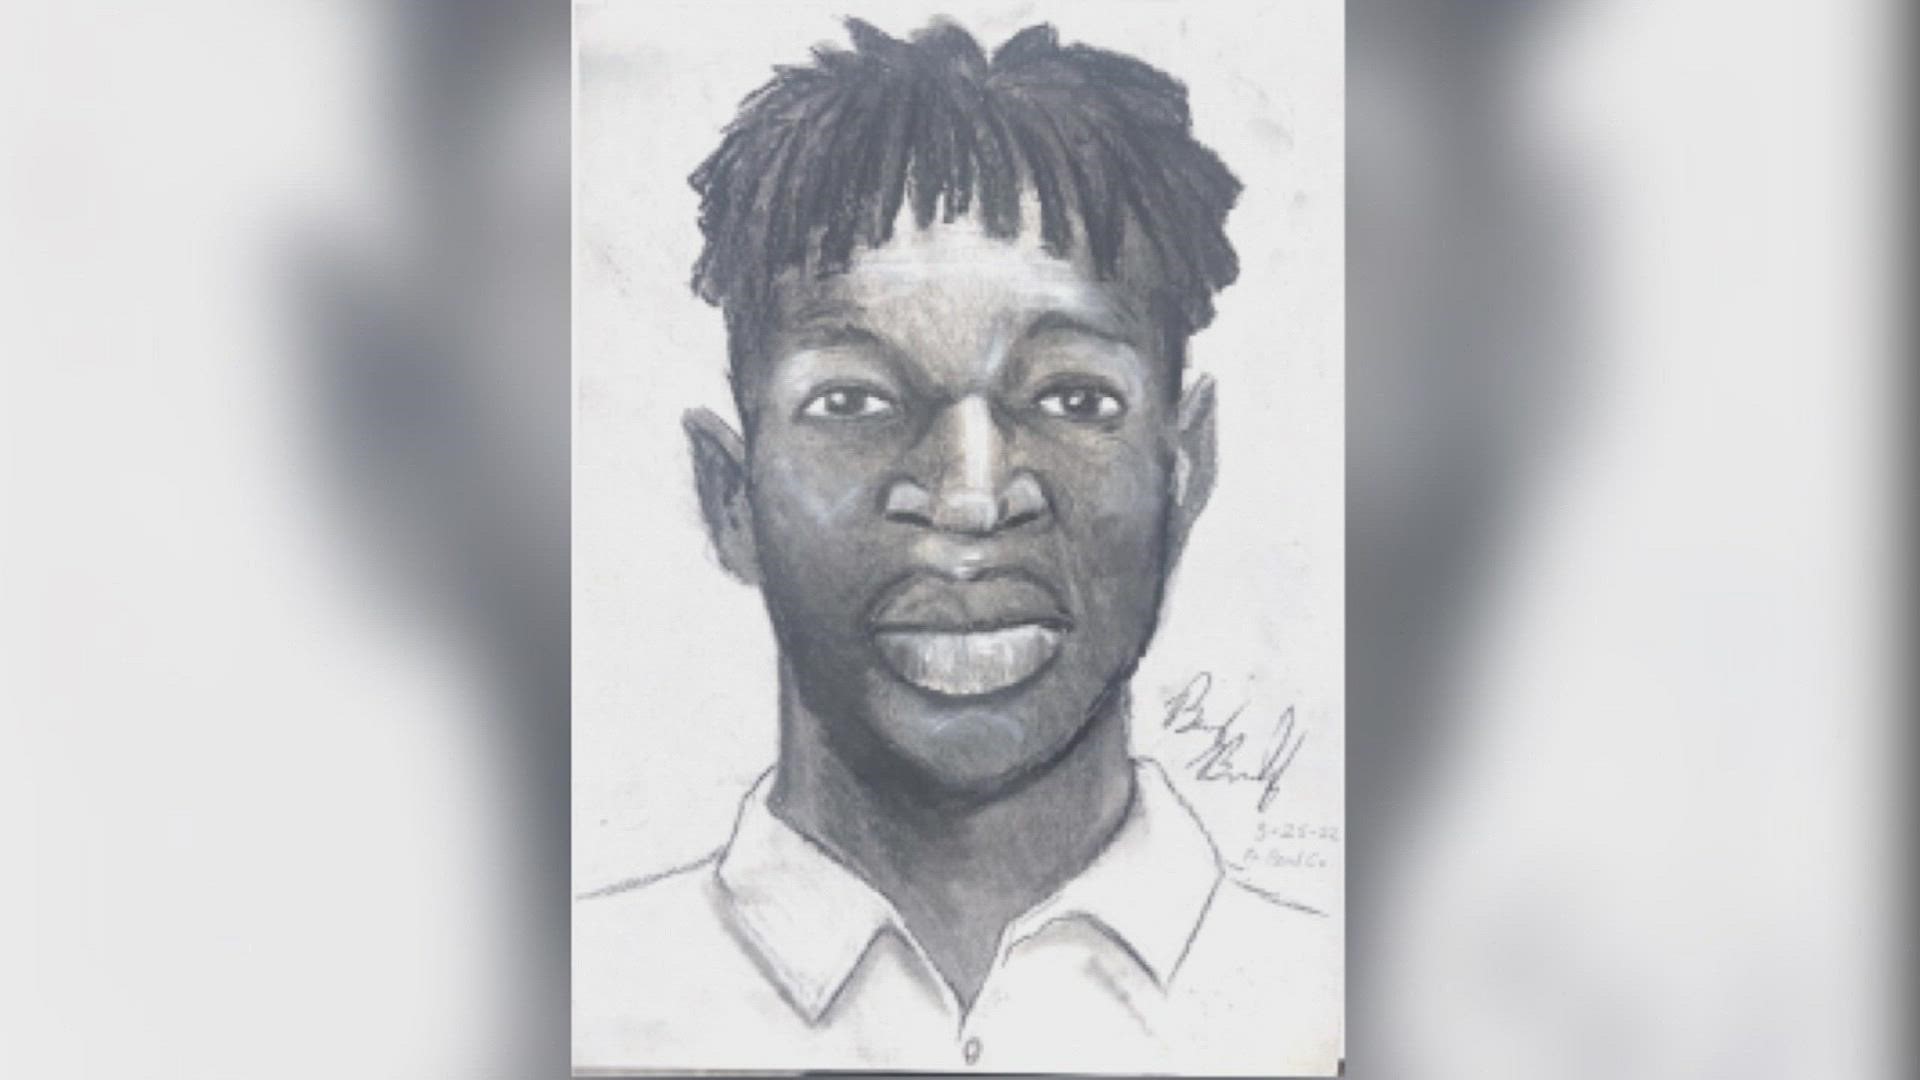 A woman said she was attacked by a young man on Tuesday. The FBCSO released a sketch drawing of the suspect.